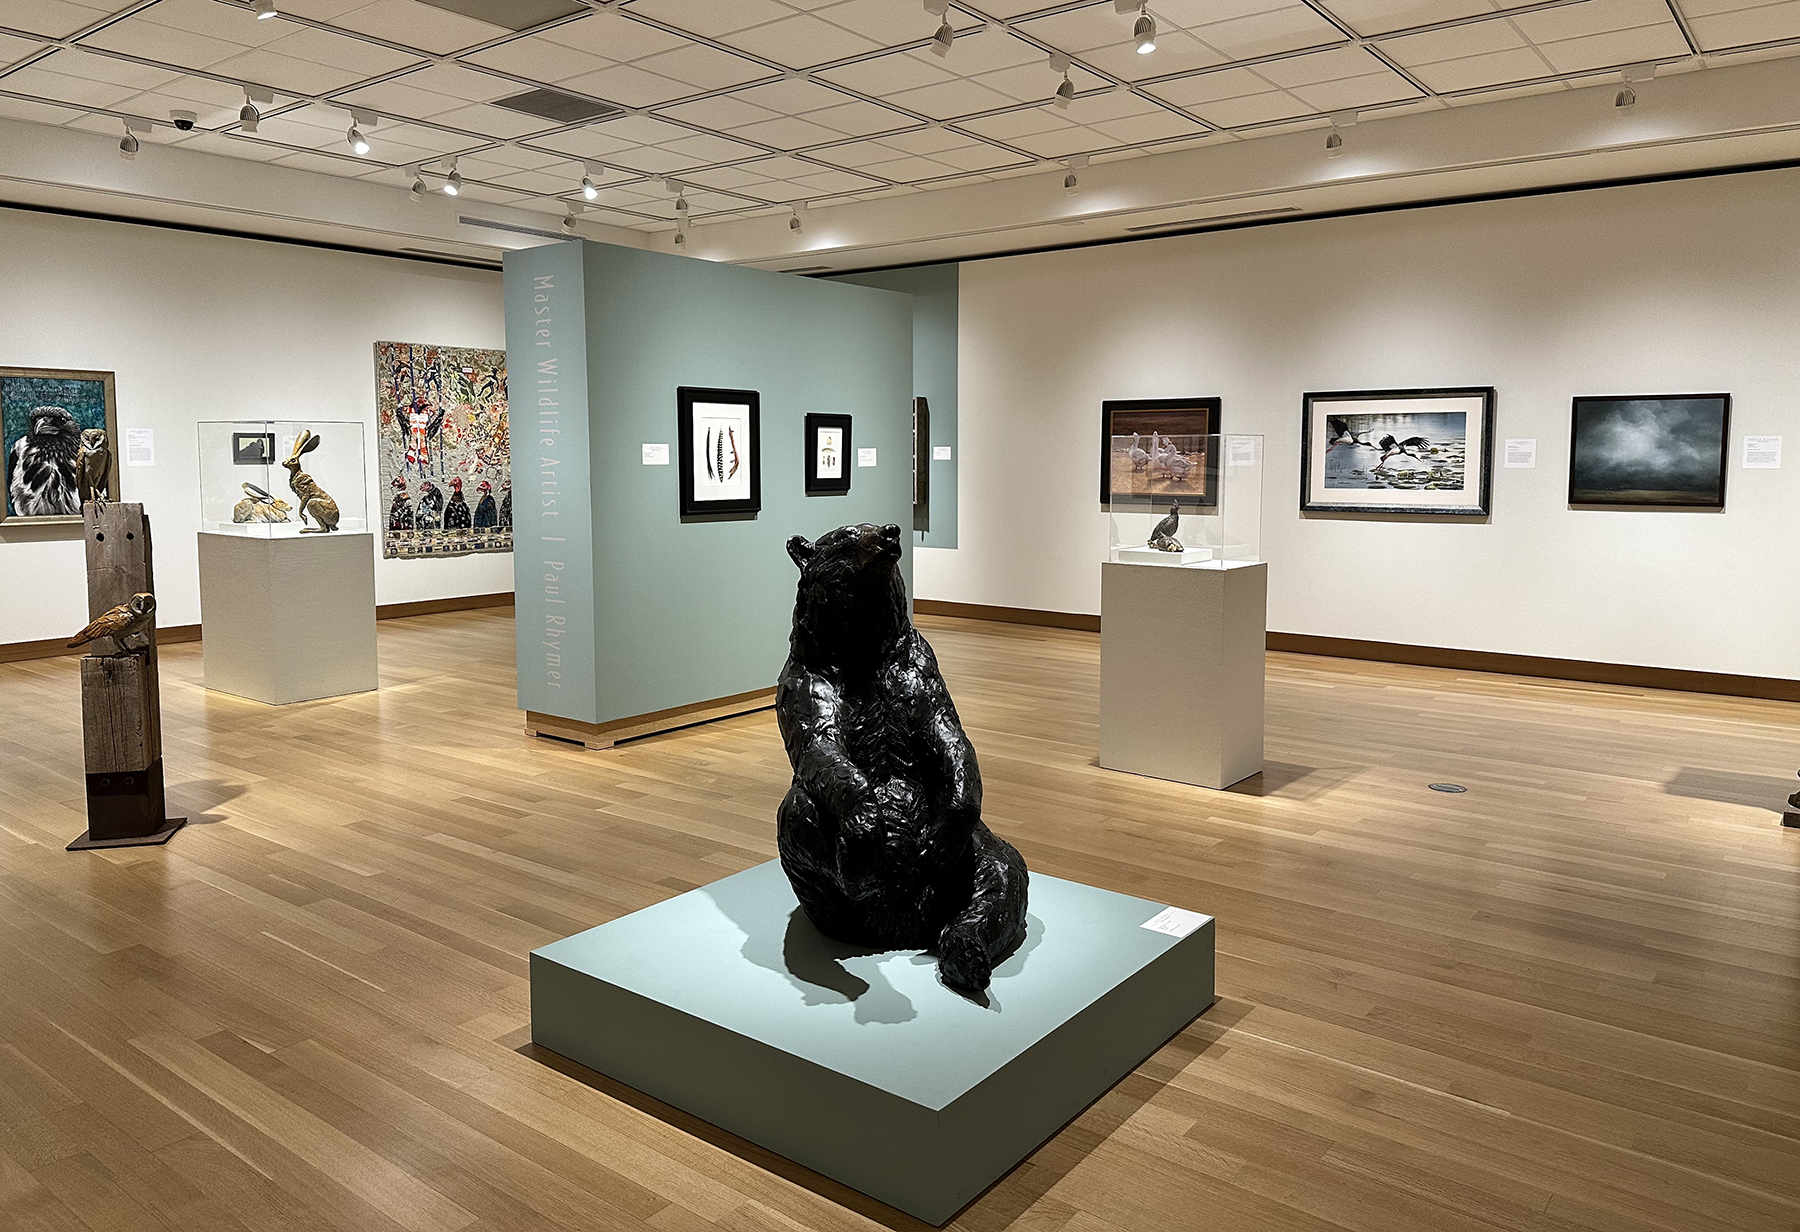 Image of Birds in Art galleries with artwork on the walls and sculptures on the ground